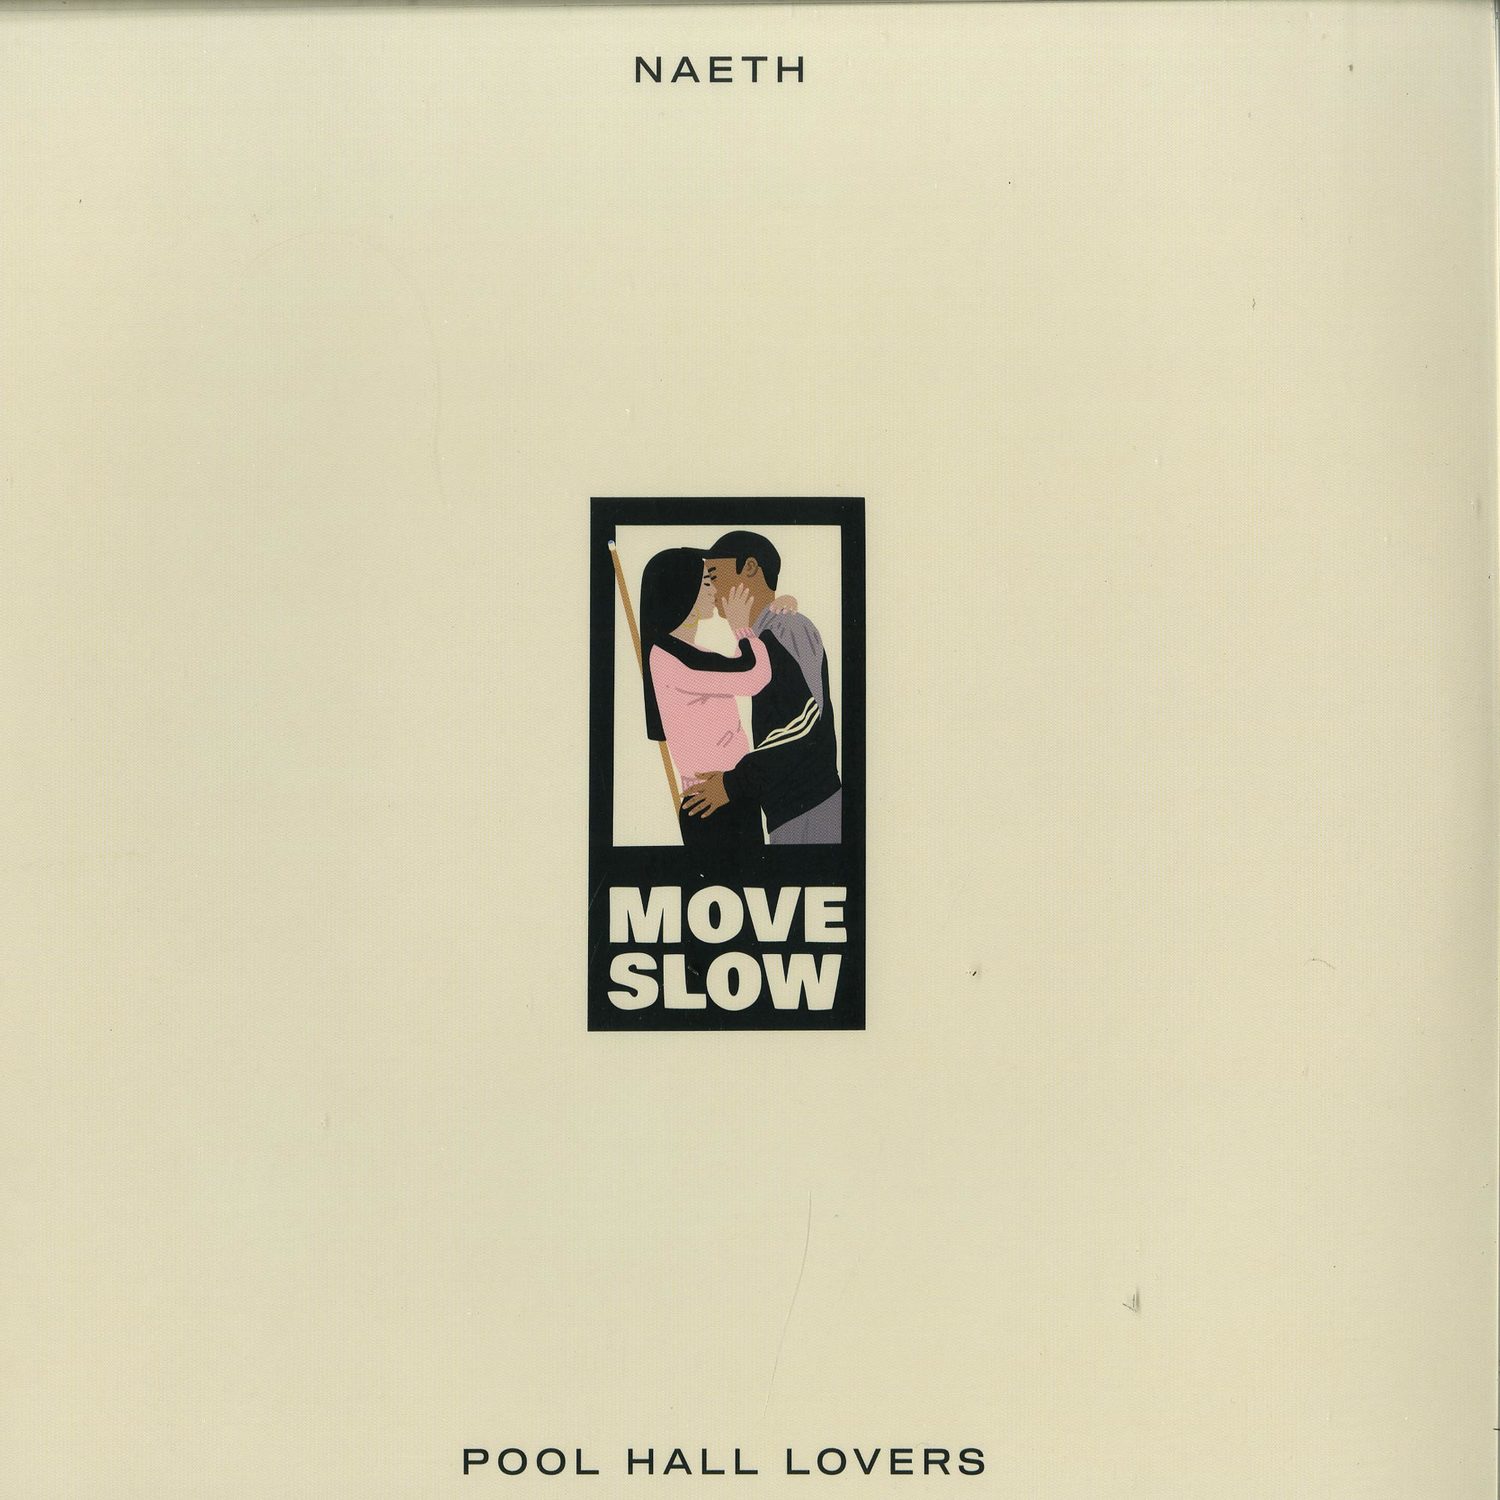 Naeth - POOLHALL LOVERS